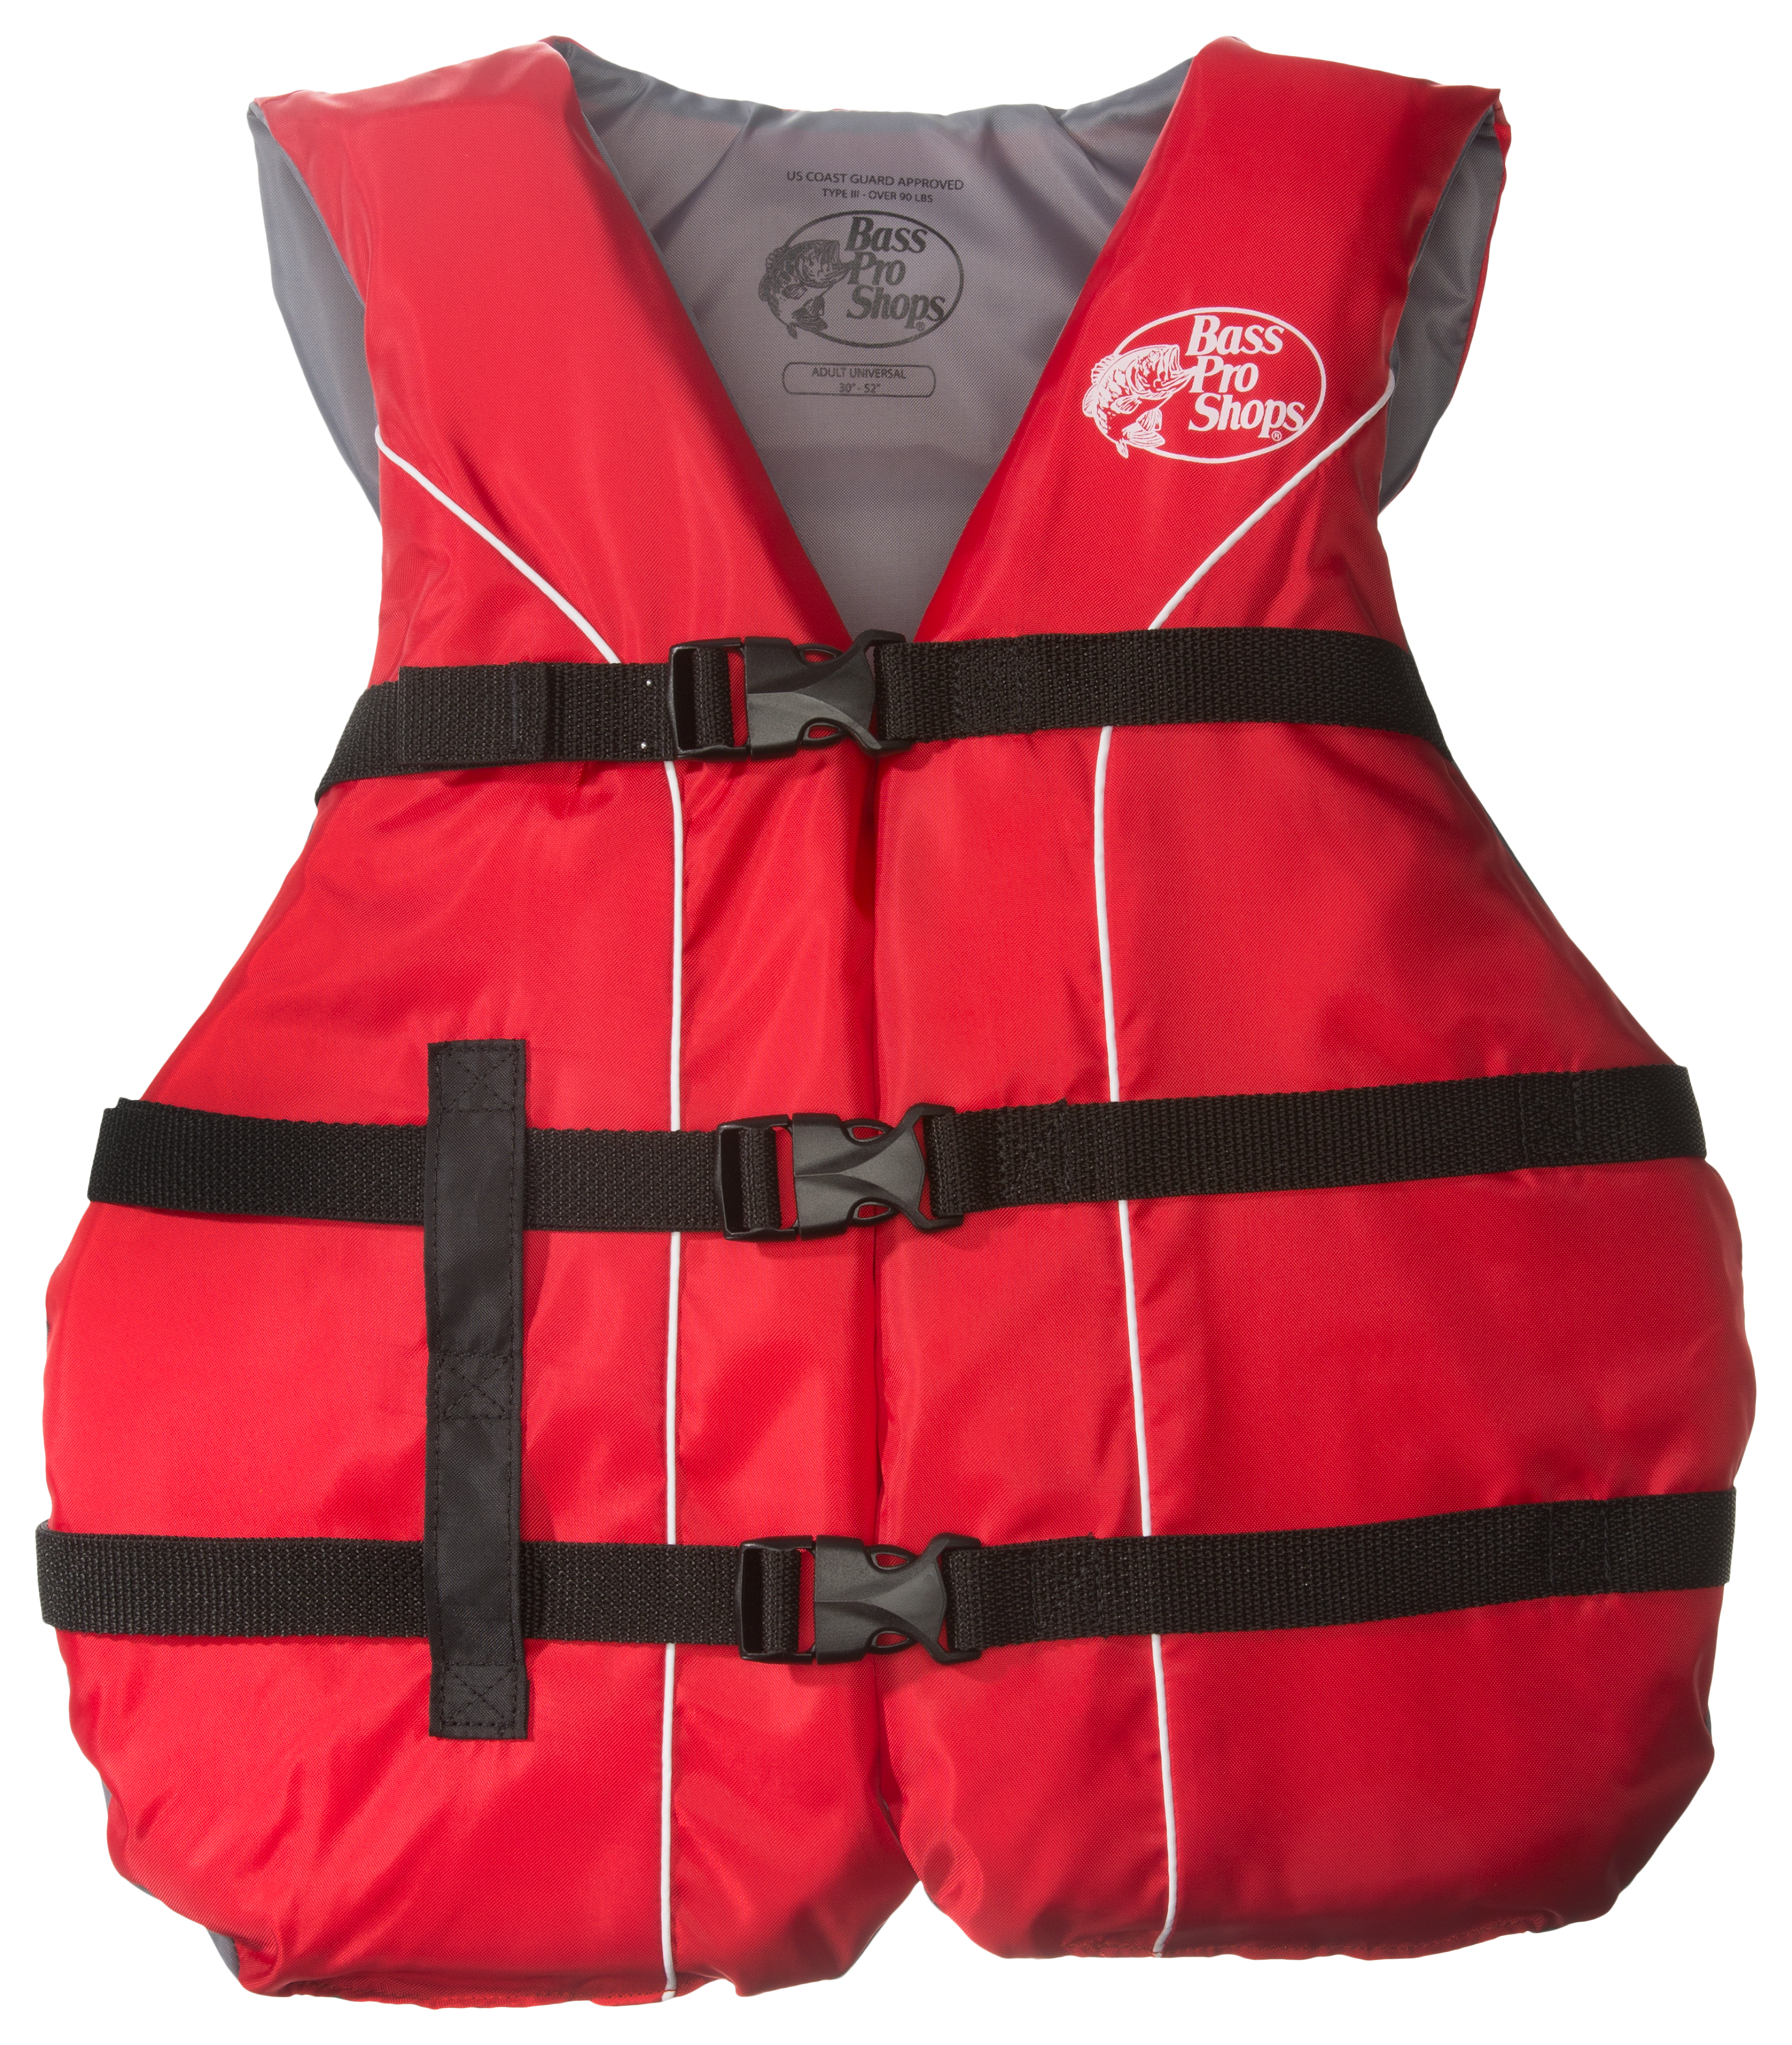 Bass Pro Shops Deluxe Mesh Fishing Life Vest for Adults - Silver Grey - M